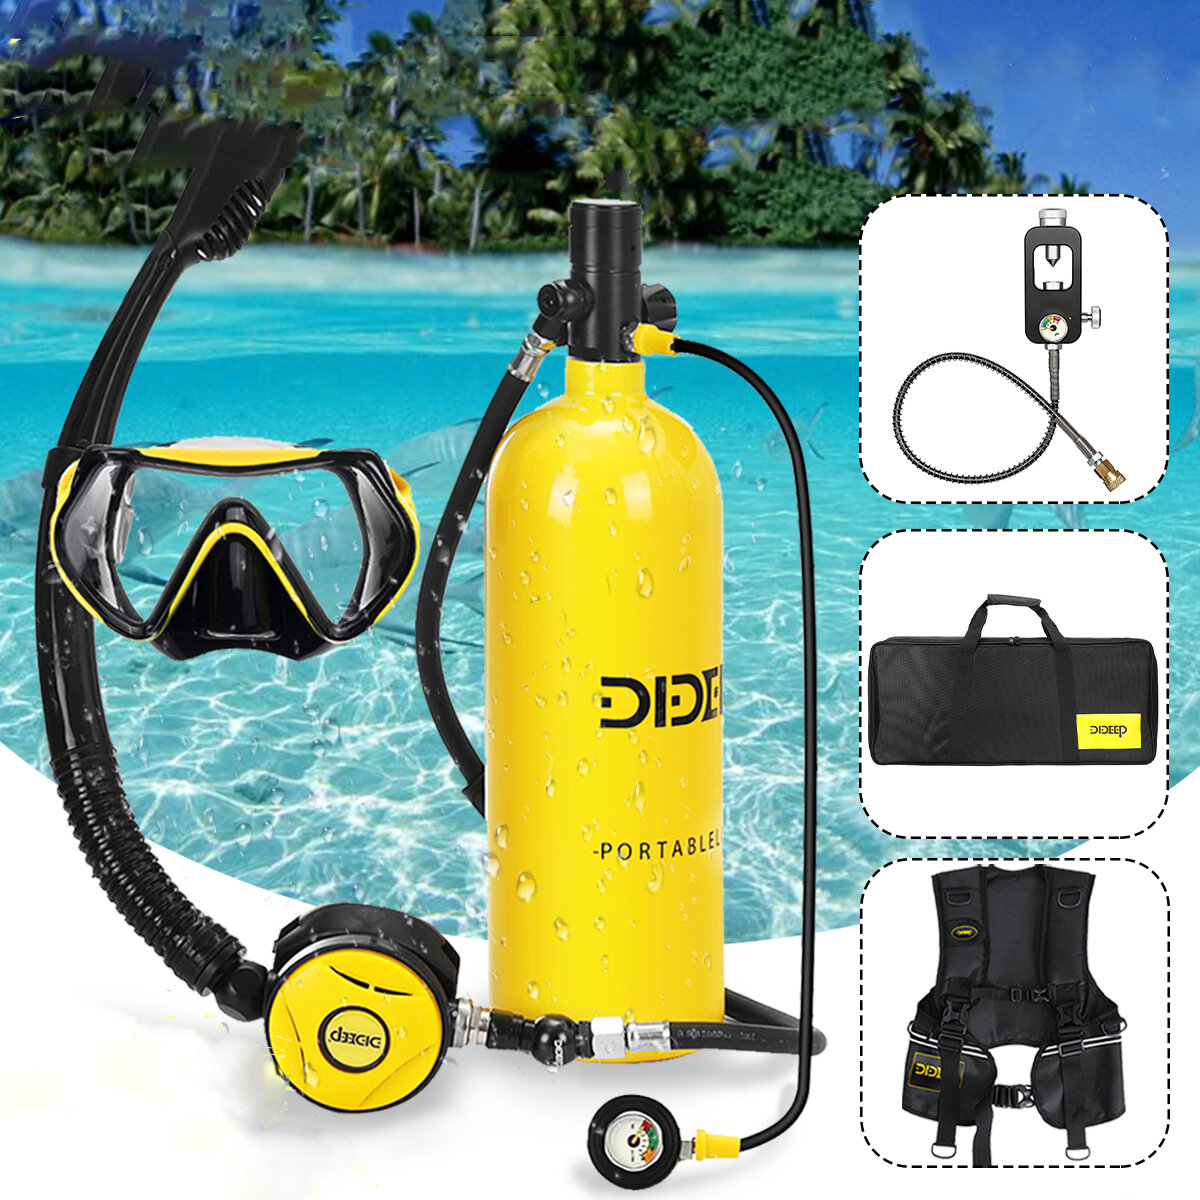 Image of DIDEEP X5000 Plus+ 2L Scuba Diving Tank Air Snorkeling Oxygen Cylinder Underwater Equipment with Vest Bag Adapter Glasse